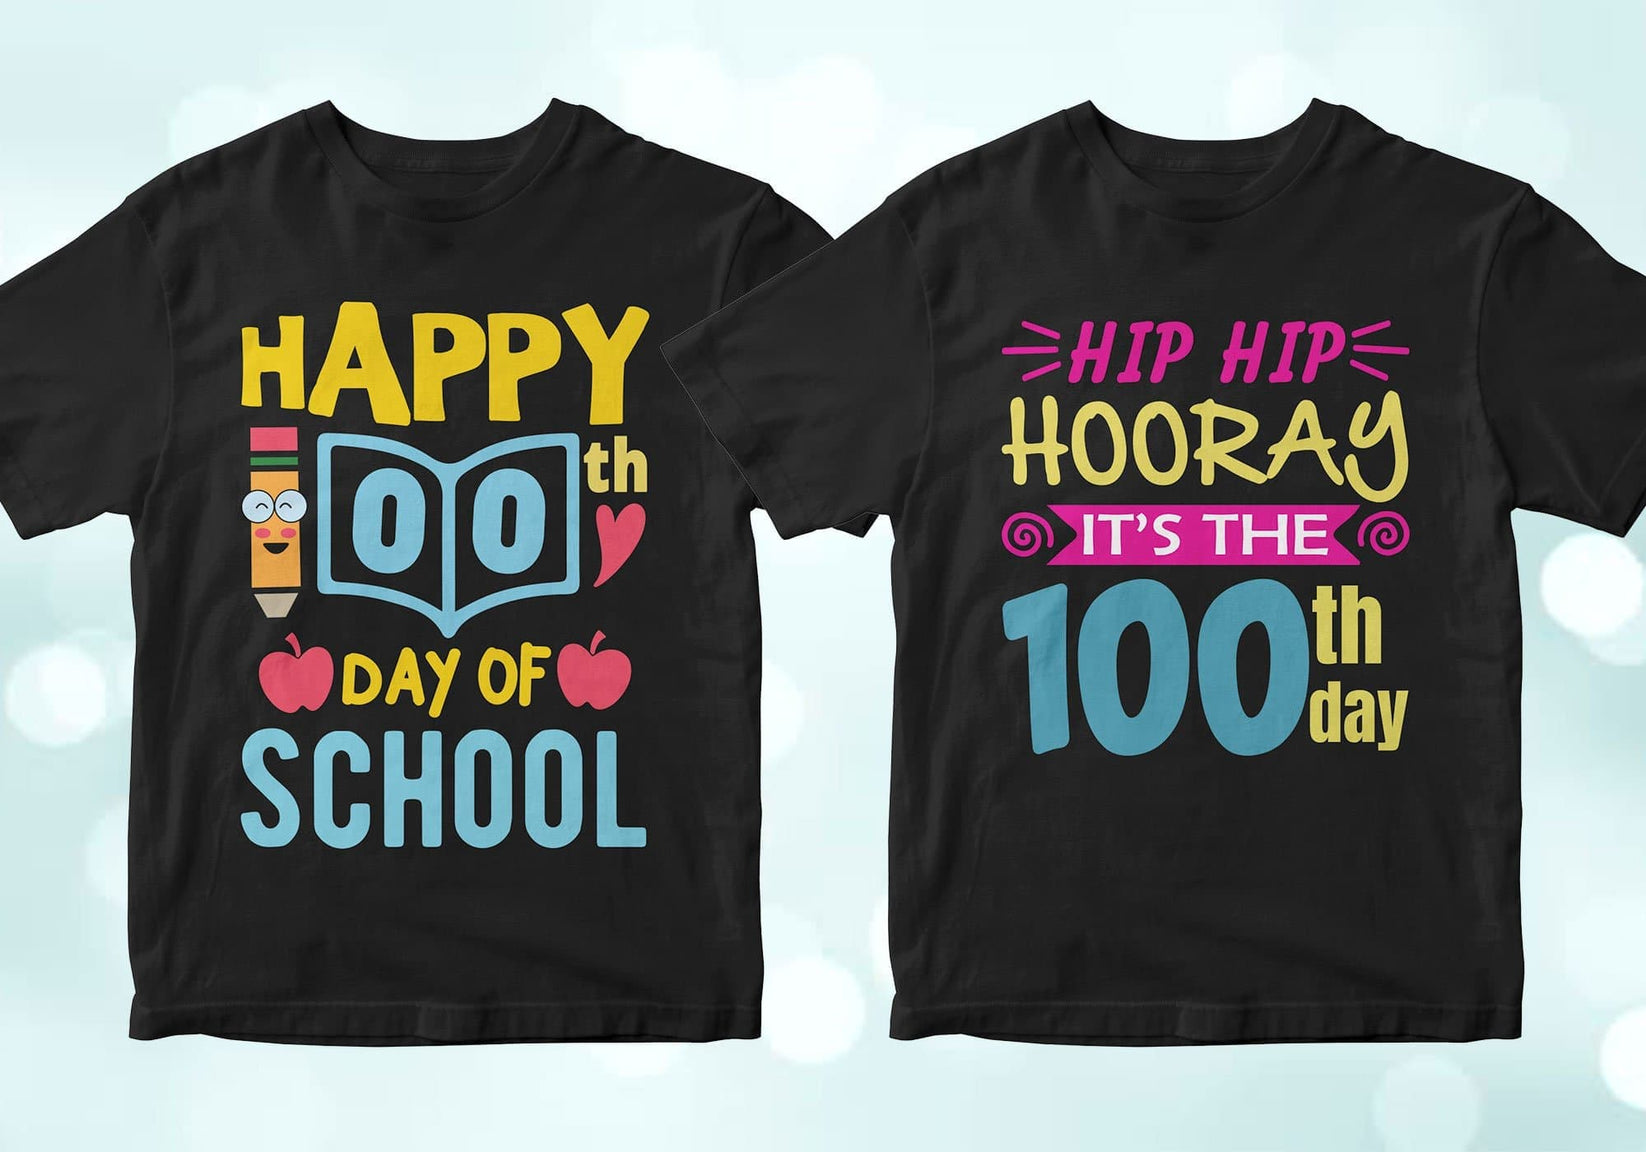 Happy 100th day of school, hip hip hooray it's the 100th day